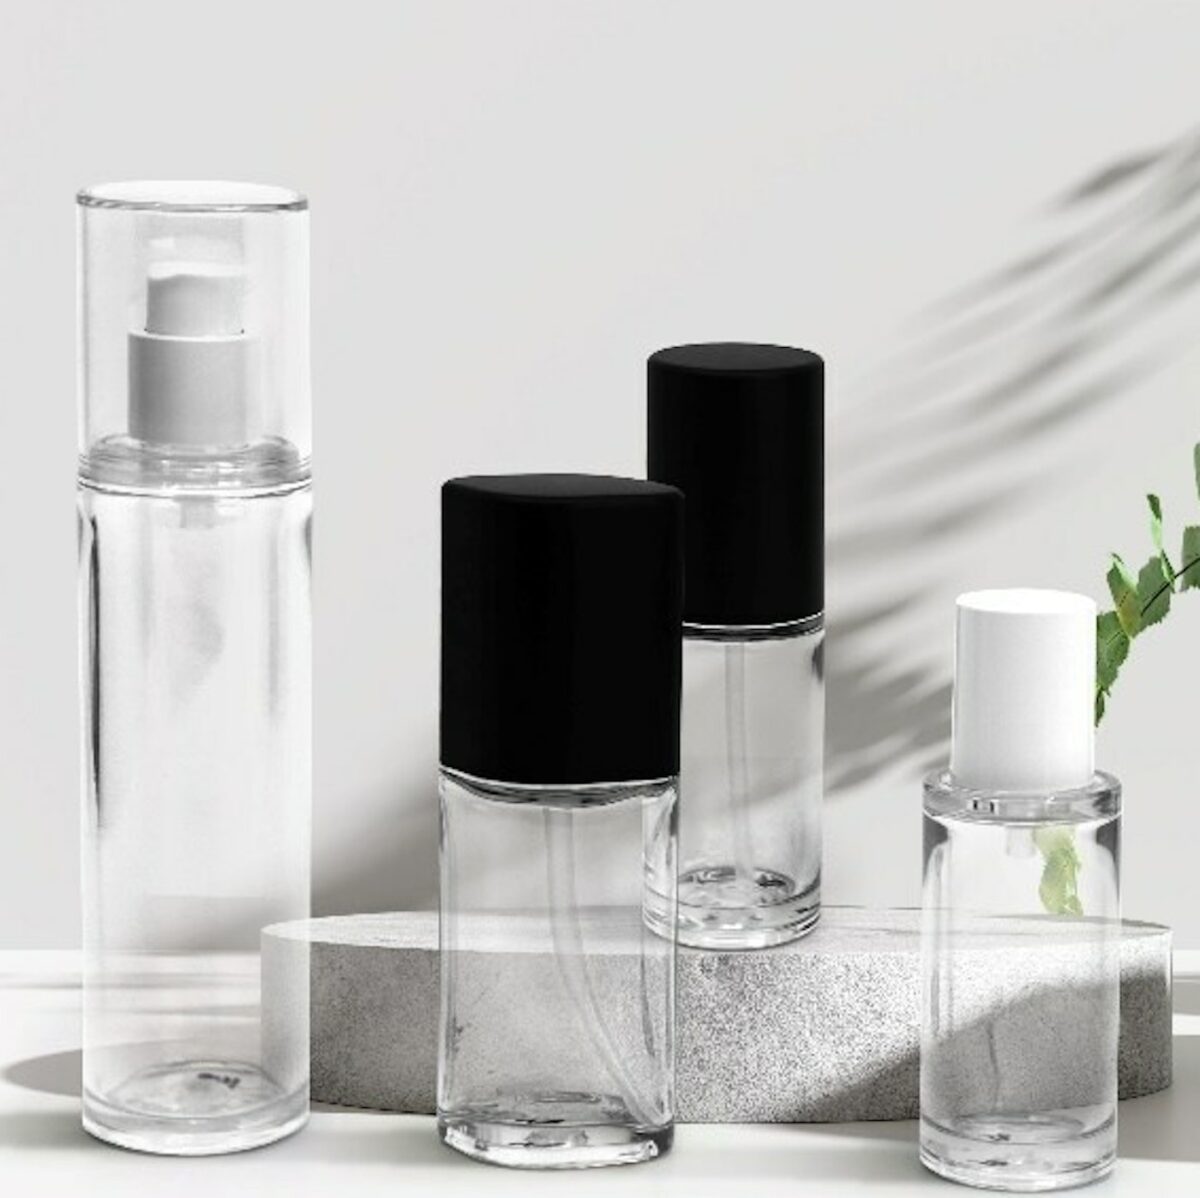 Estée Lauder will use recycled PET and PET-like resins from SK Chemicals to make its global cosmetics packaging circular.